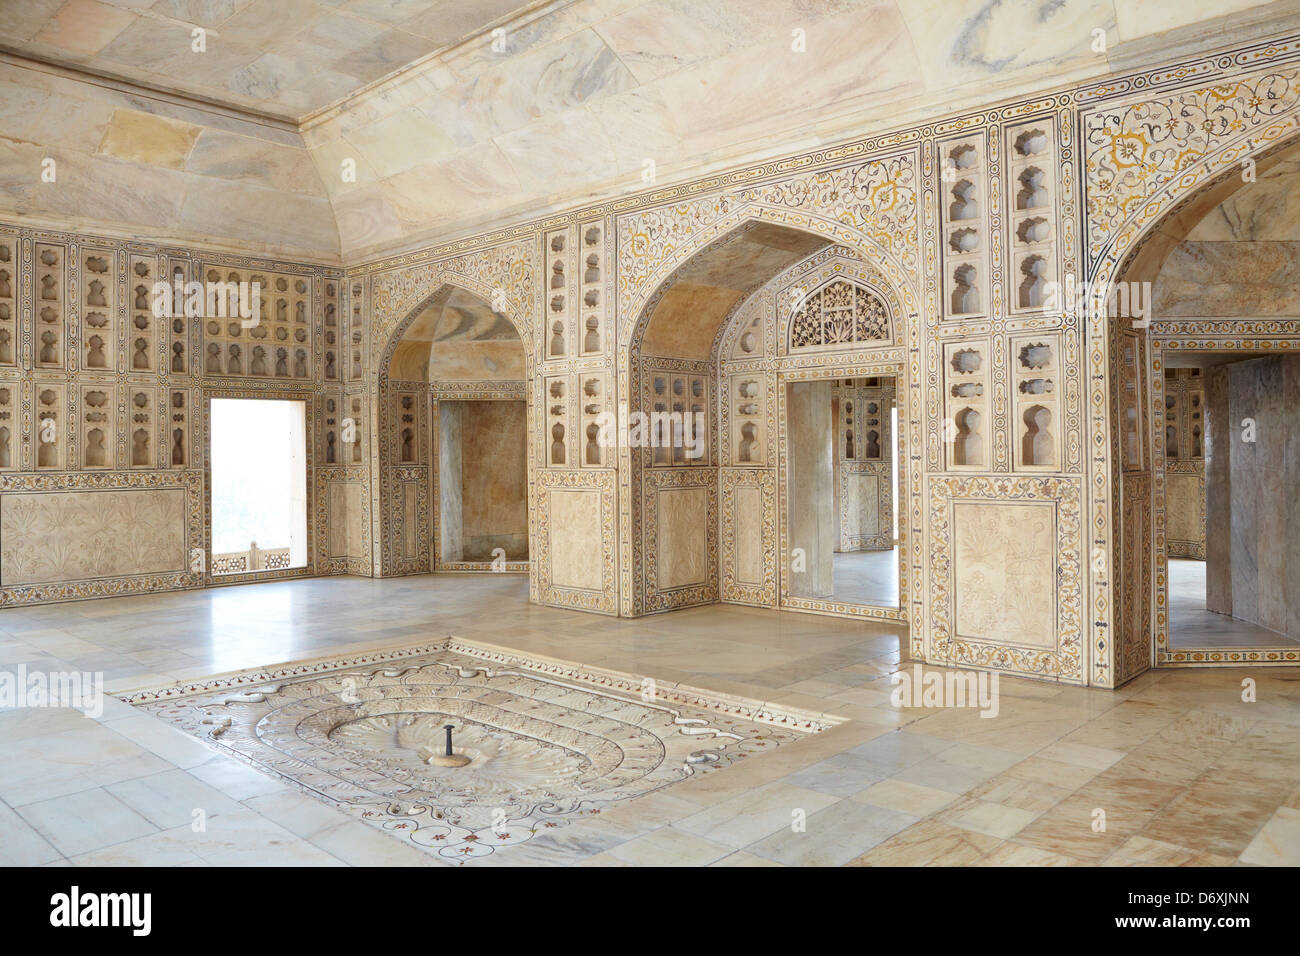 Agra, Red Fort - interior of the Khas Mahal central pavilion with indoor fountain and stone reliefs, Agra, India Stock Photo